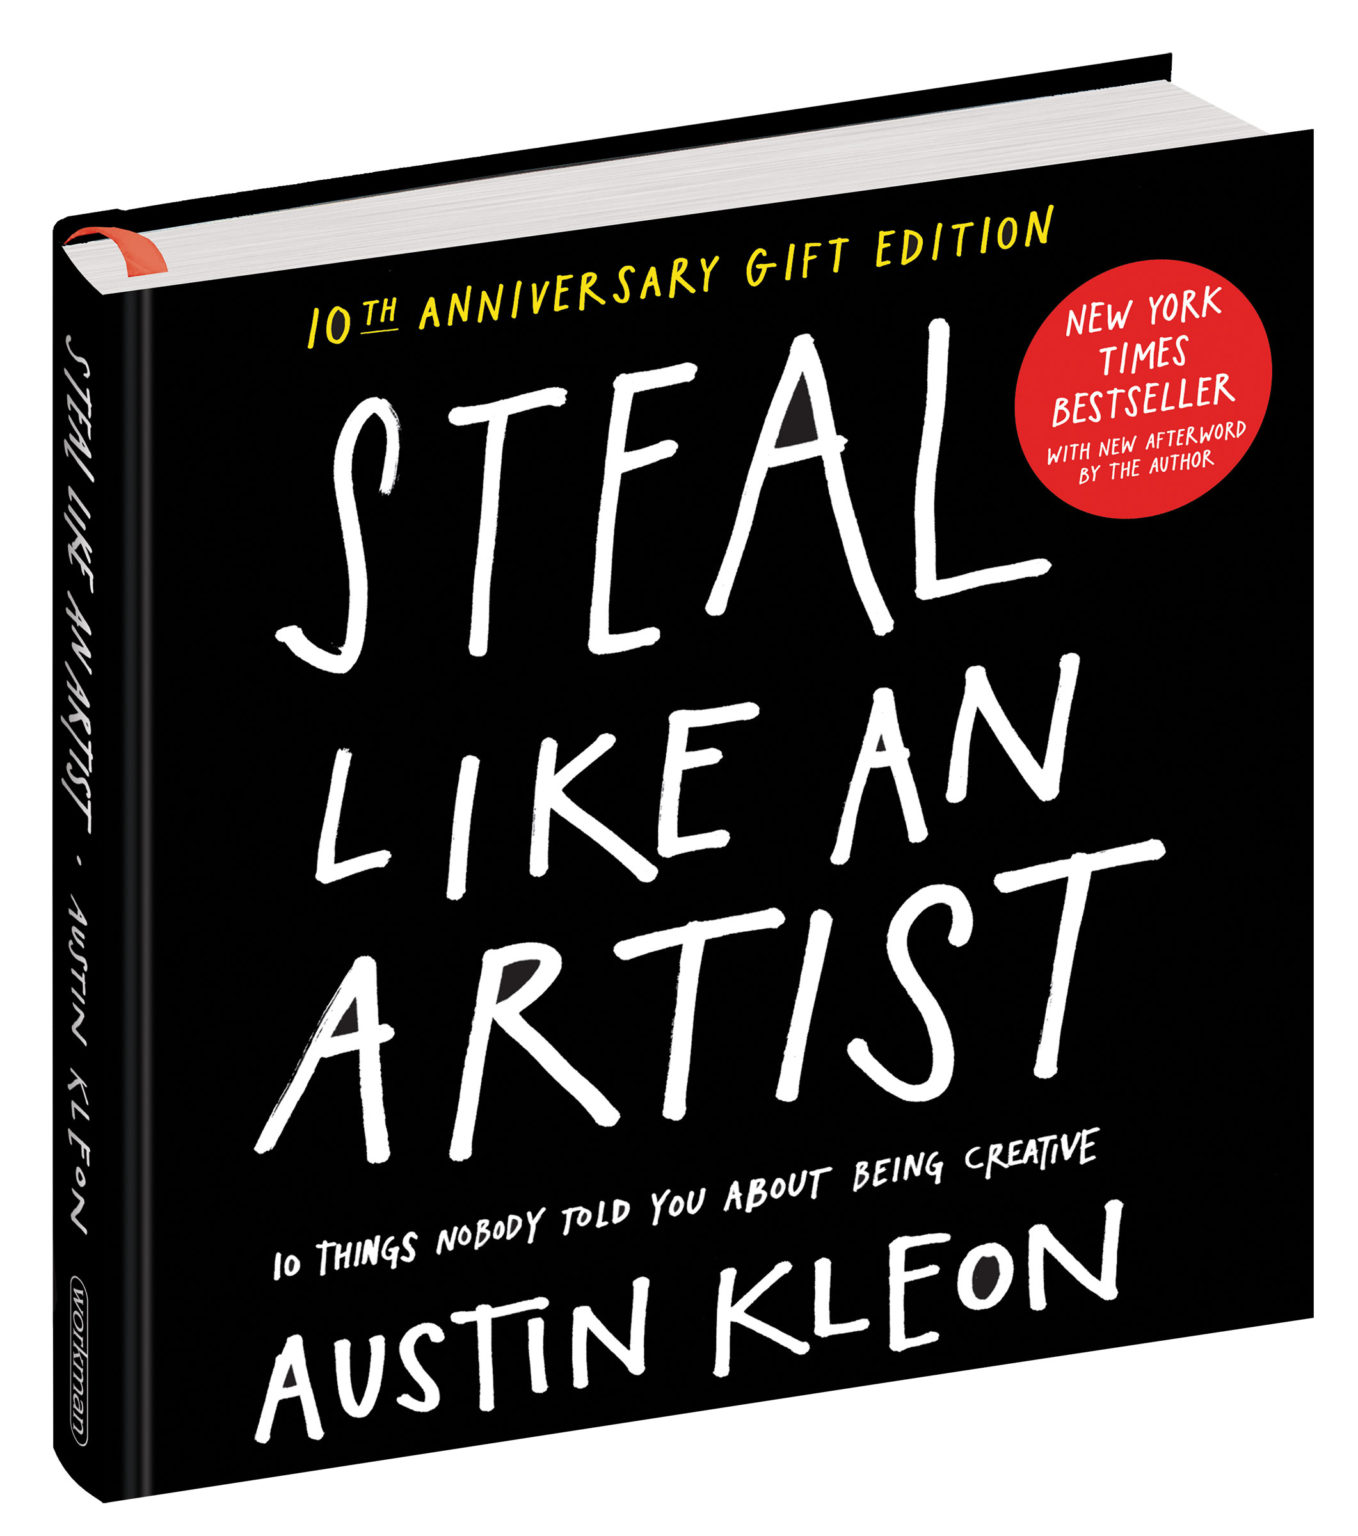 the book 'Steal Like An Artist' by Austin Kleon